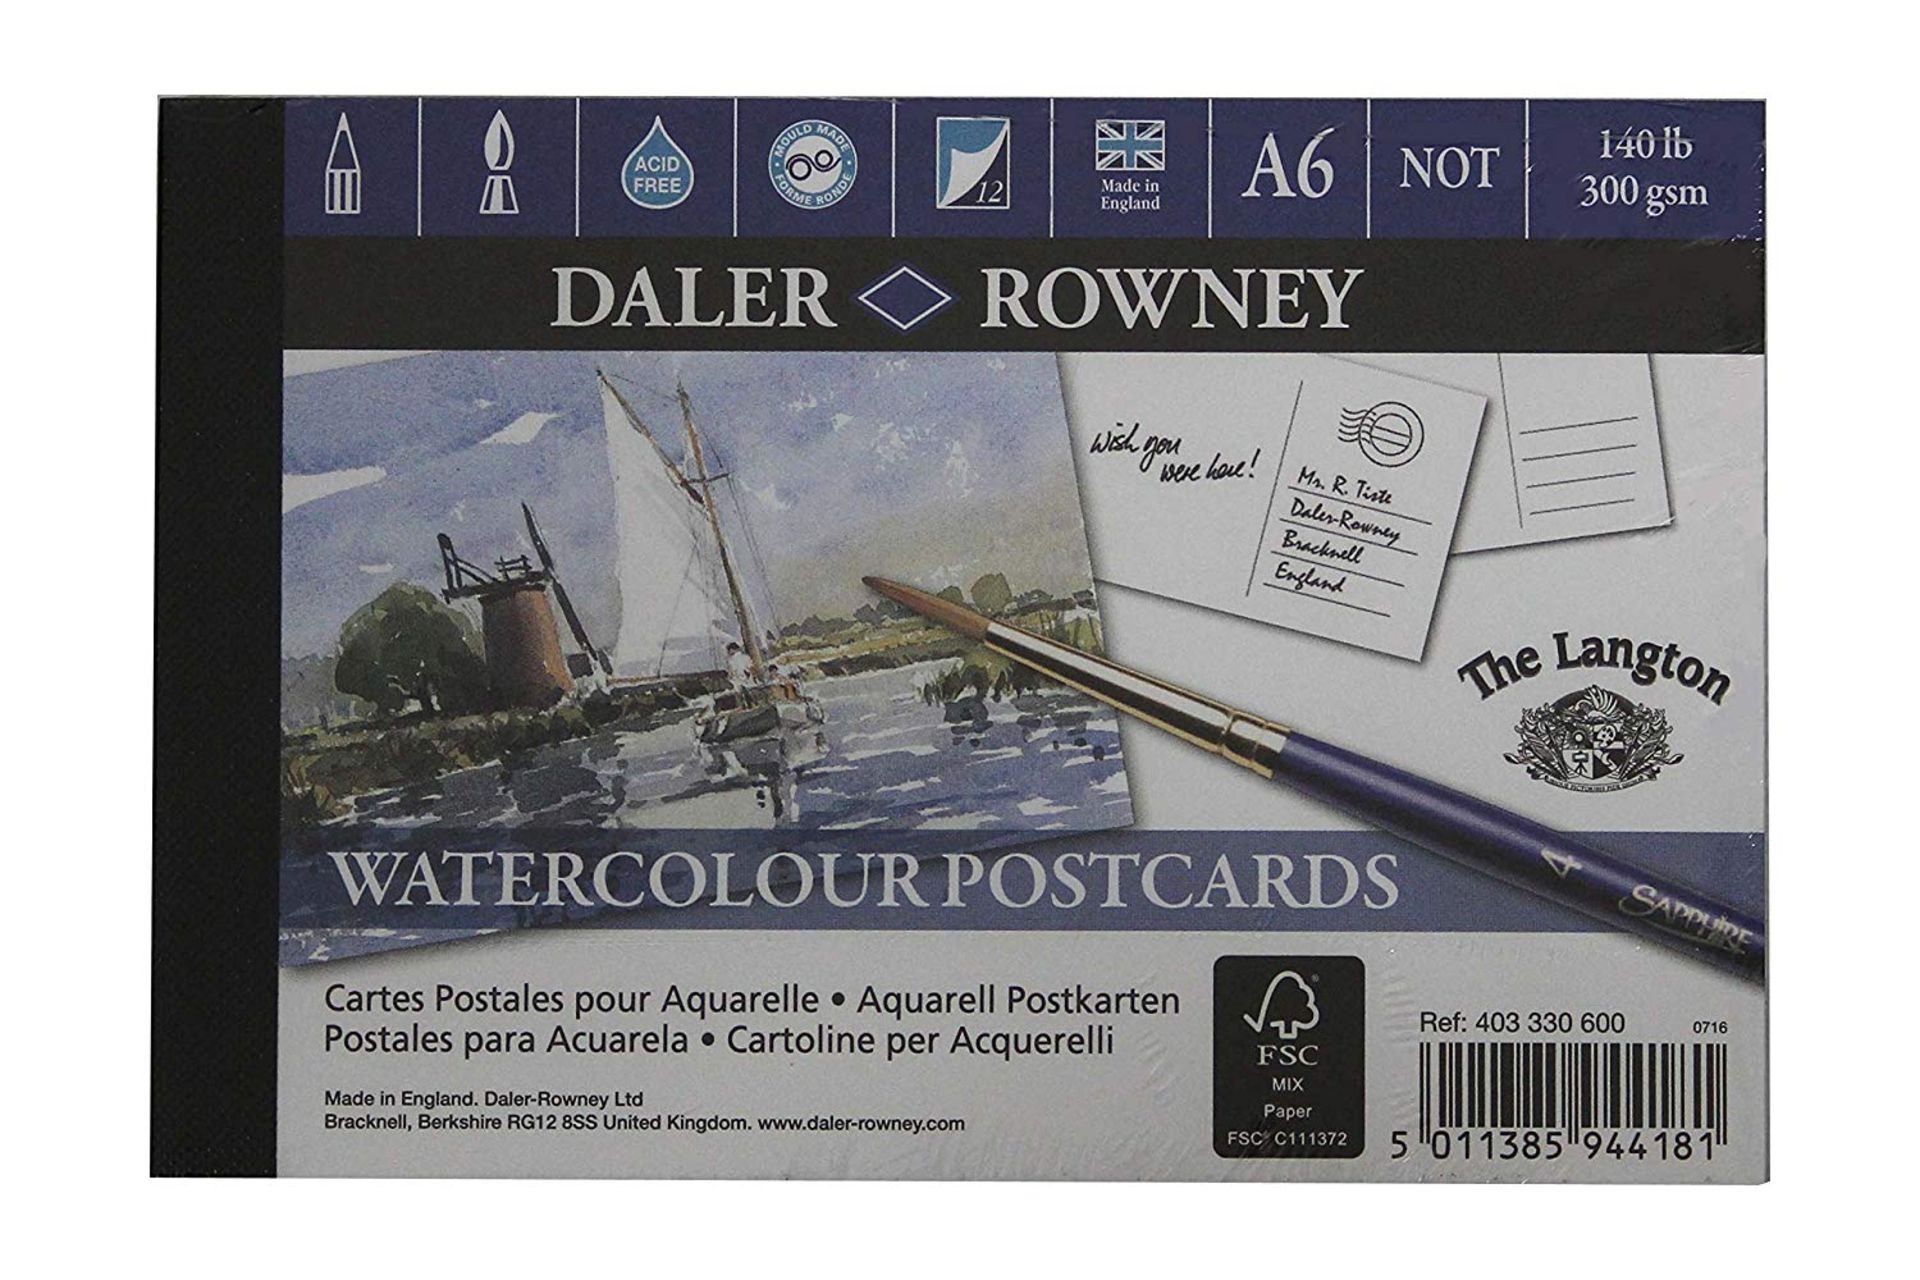 126 x Arts / watercolour products as listed | RRP £685.45